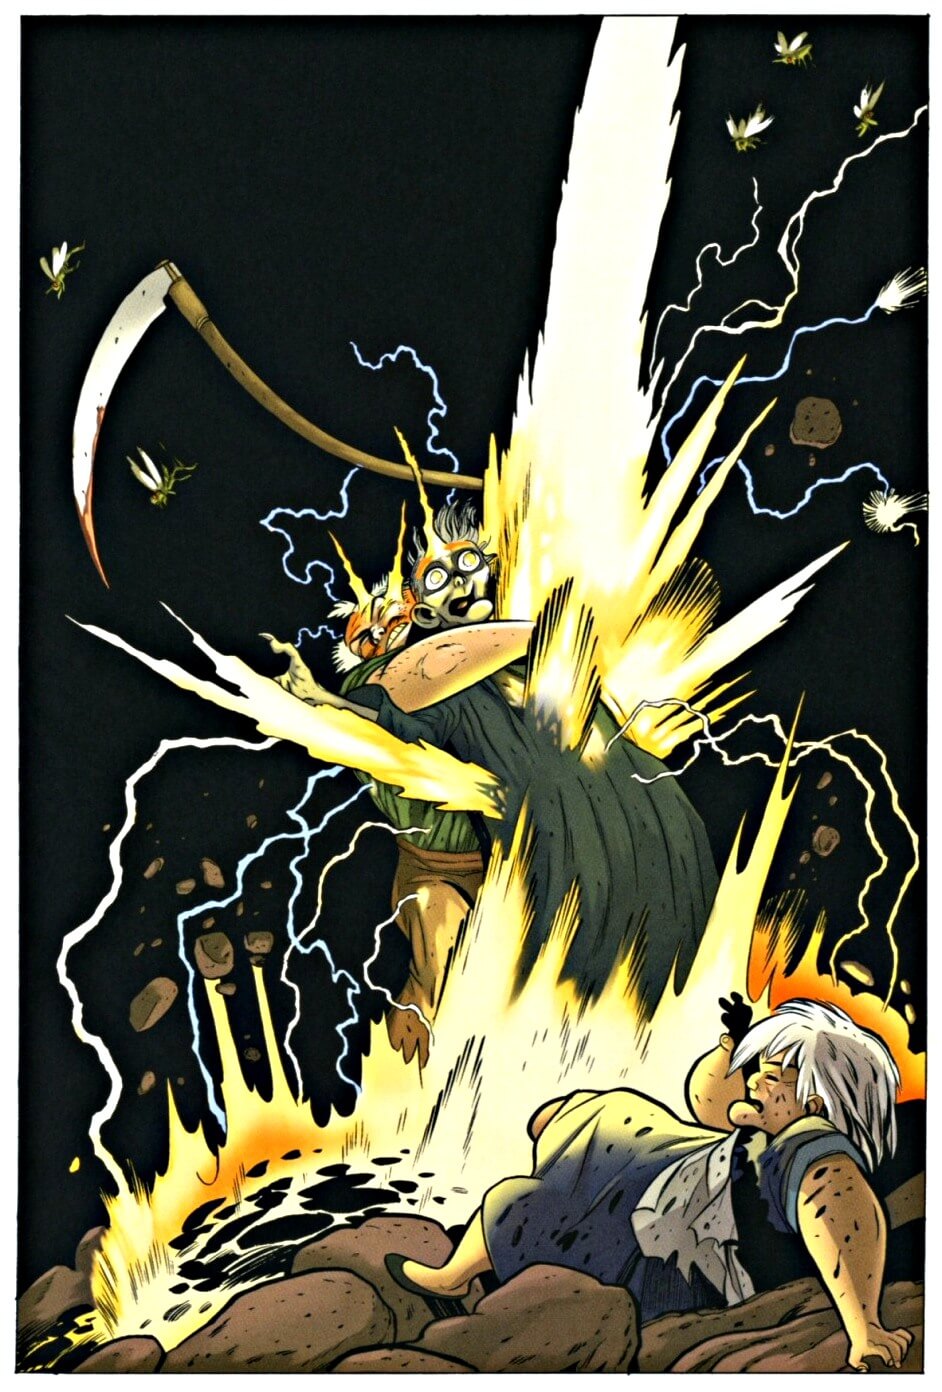 page 154 chapter 5 of bone 9 crown of horns graphic novel